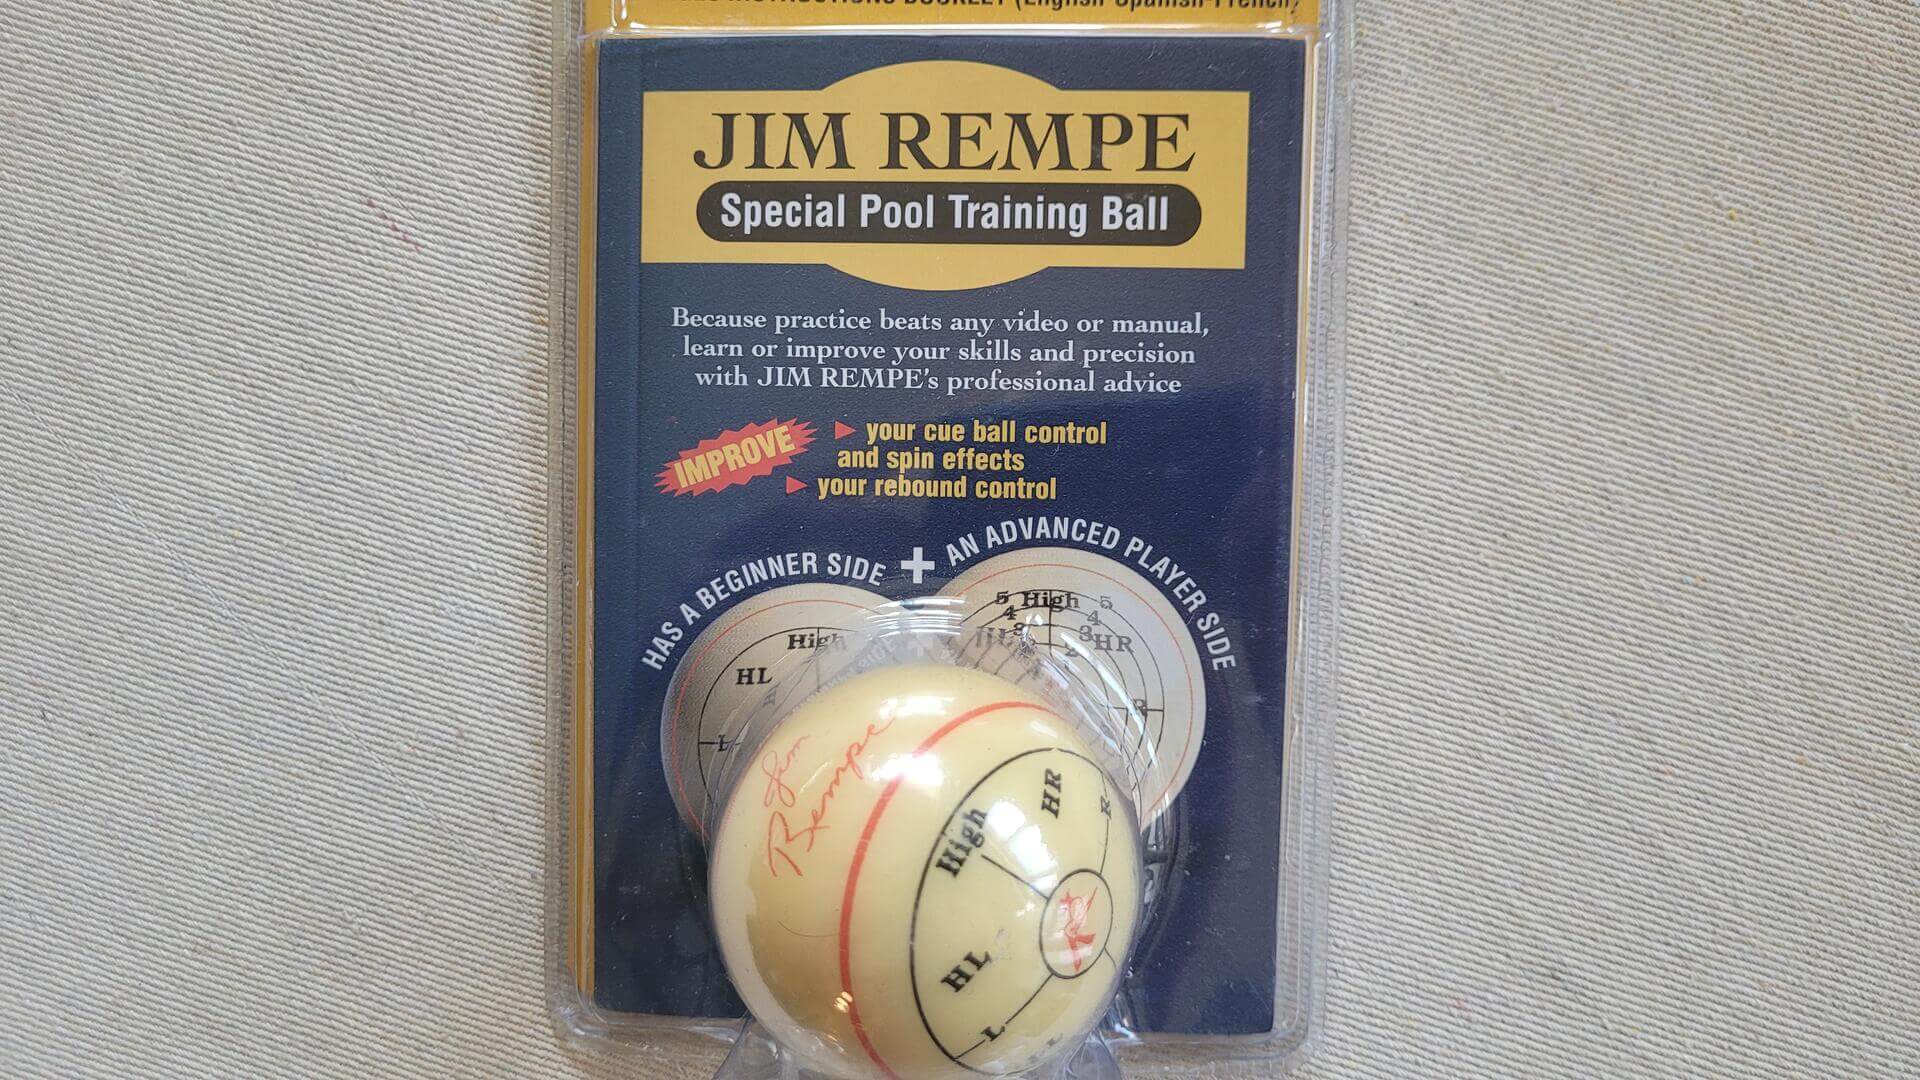 A Belgian Aramith cue ball with 2 different embedded patterns, one beginner and one advanced. See where to hit the cue ball for spin (English). Utilizing expert training methods, the Jim Rempe Training Cue Ball helps players